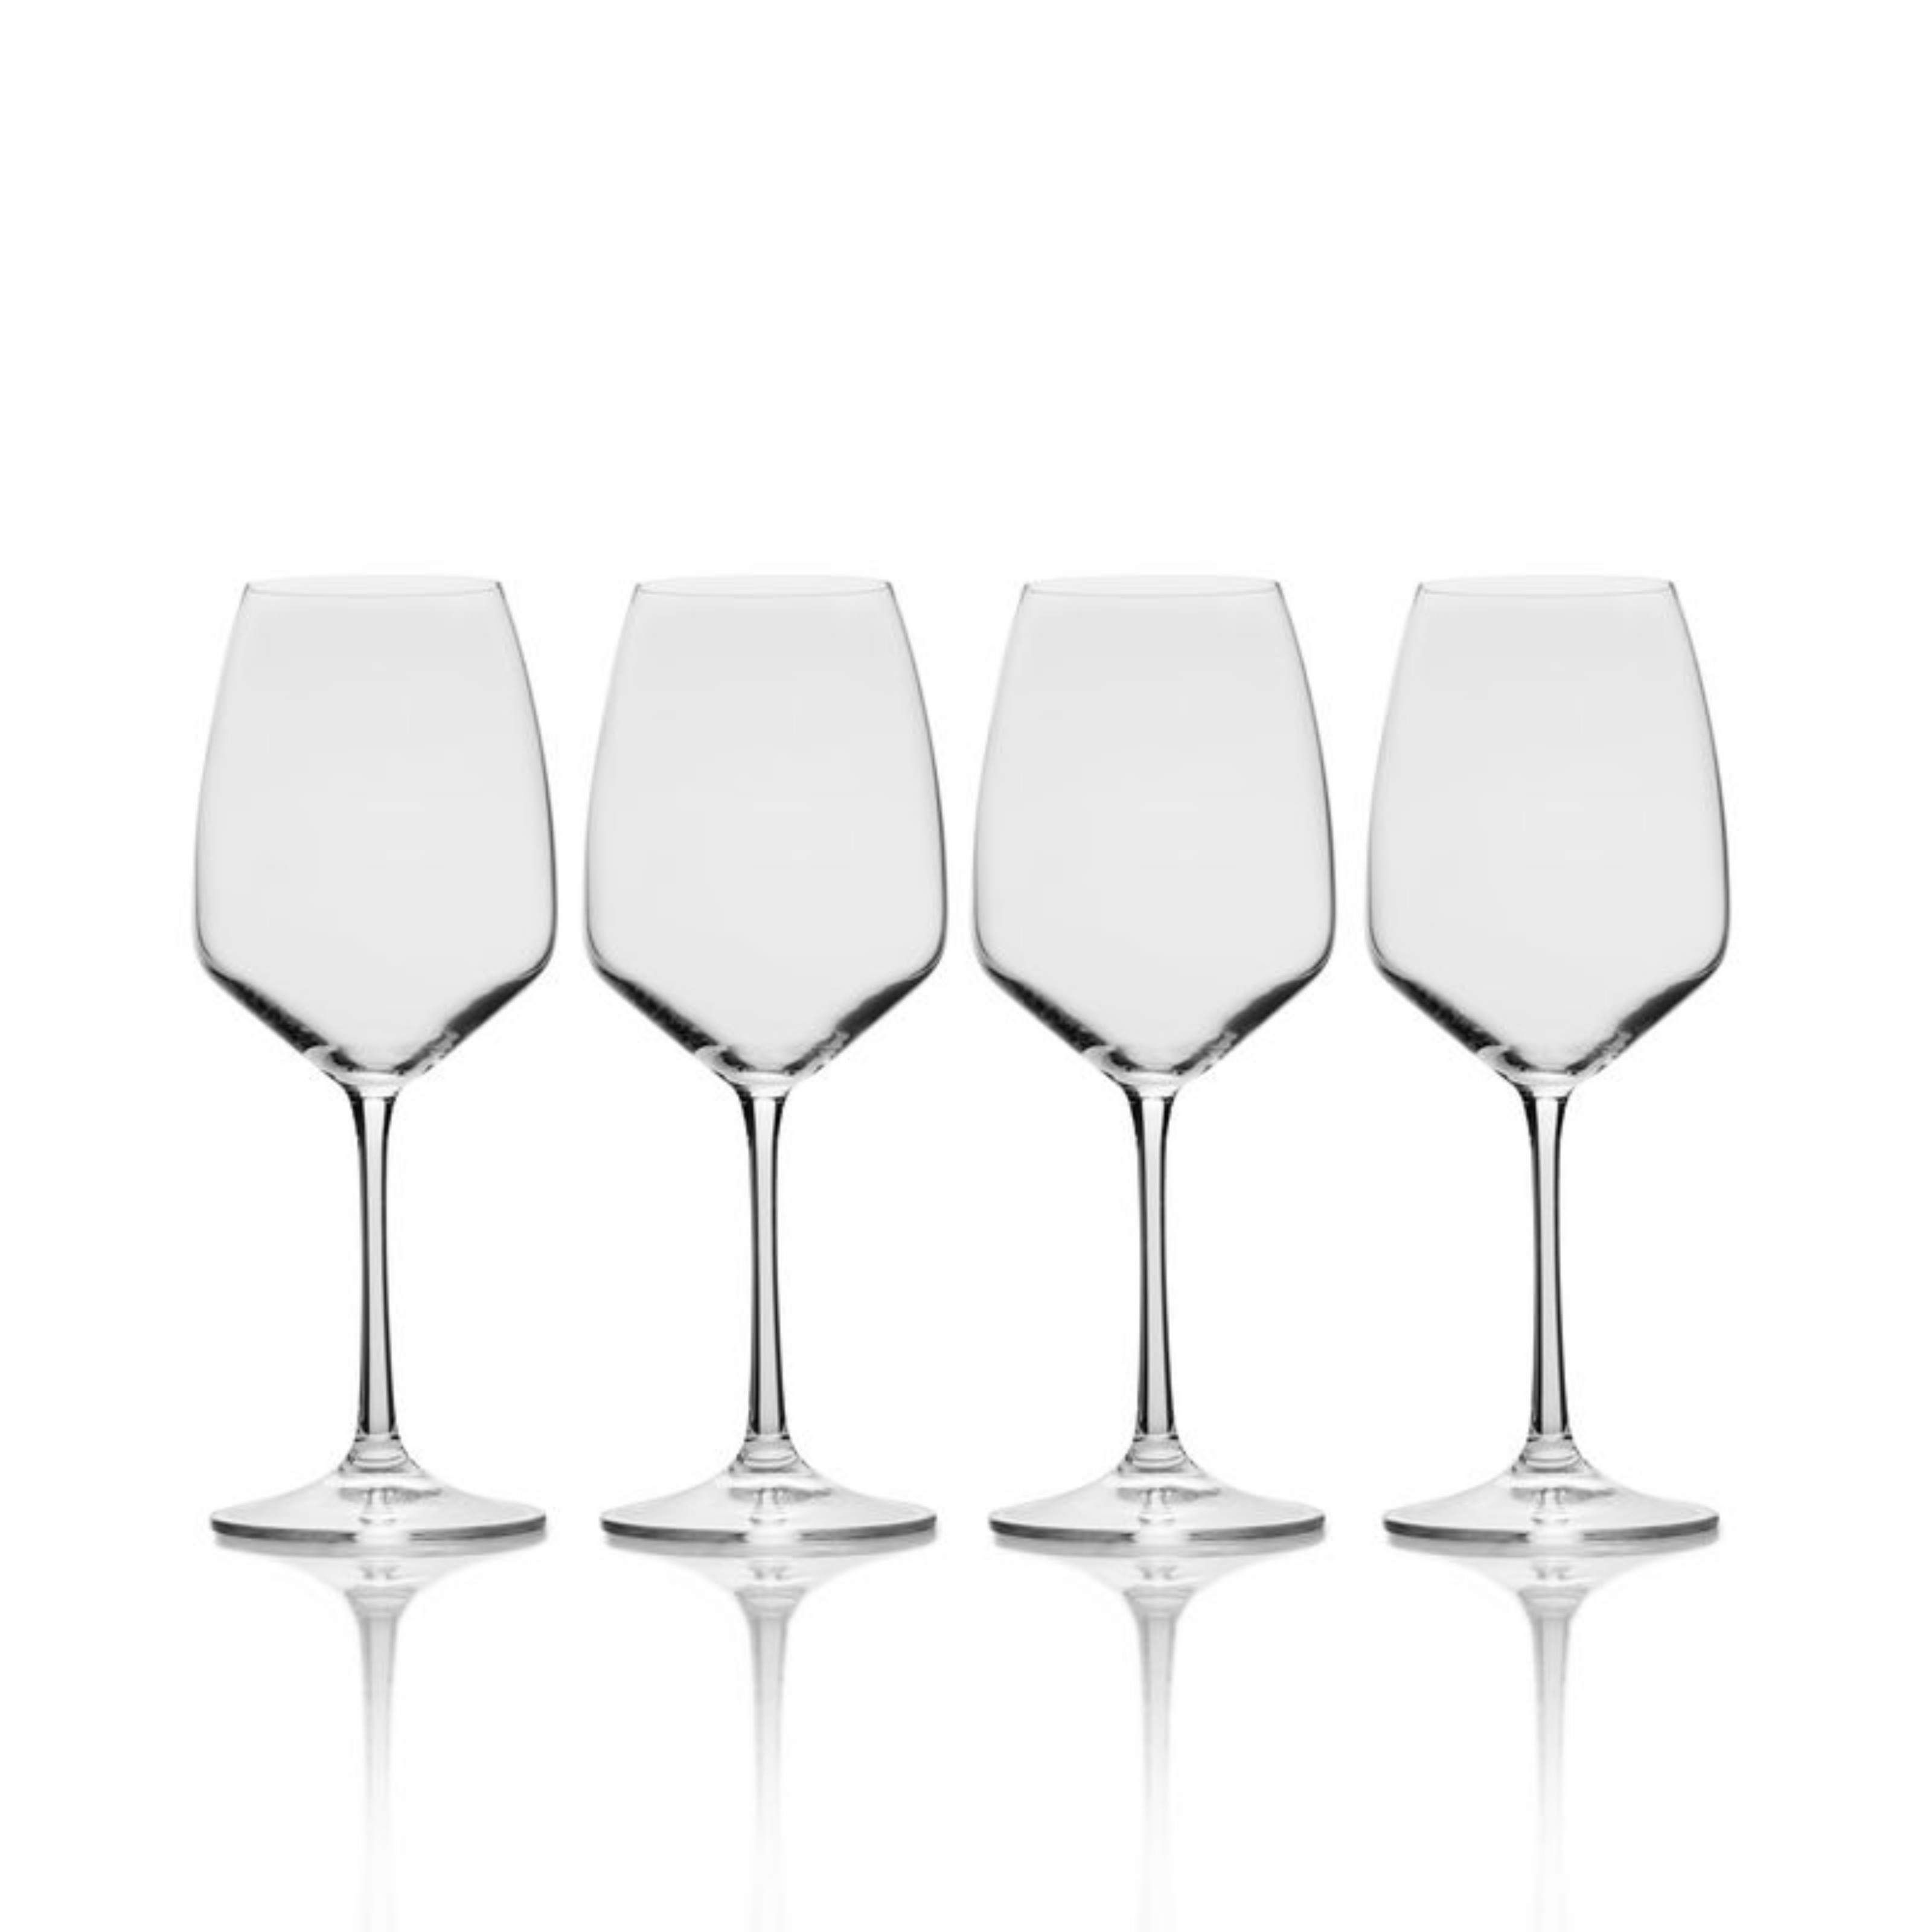 https://ak1.ostkcdn.com/images/products/is/images/direct/623b3090c86cacd33afa5218171eae812184cbce/Mikasa-Melody-15OZ-White-Wine-Glass-%28Set-of-4%29.jpg